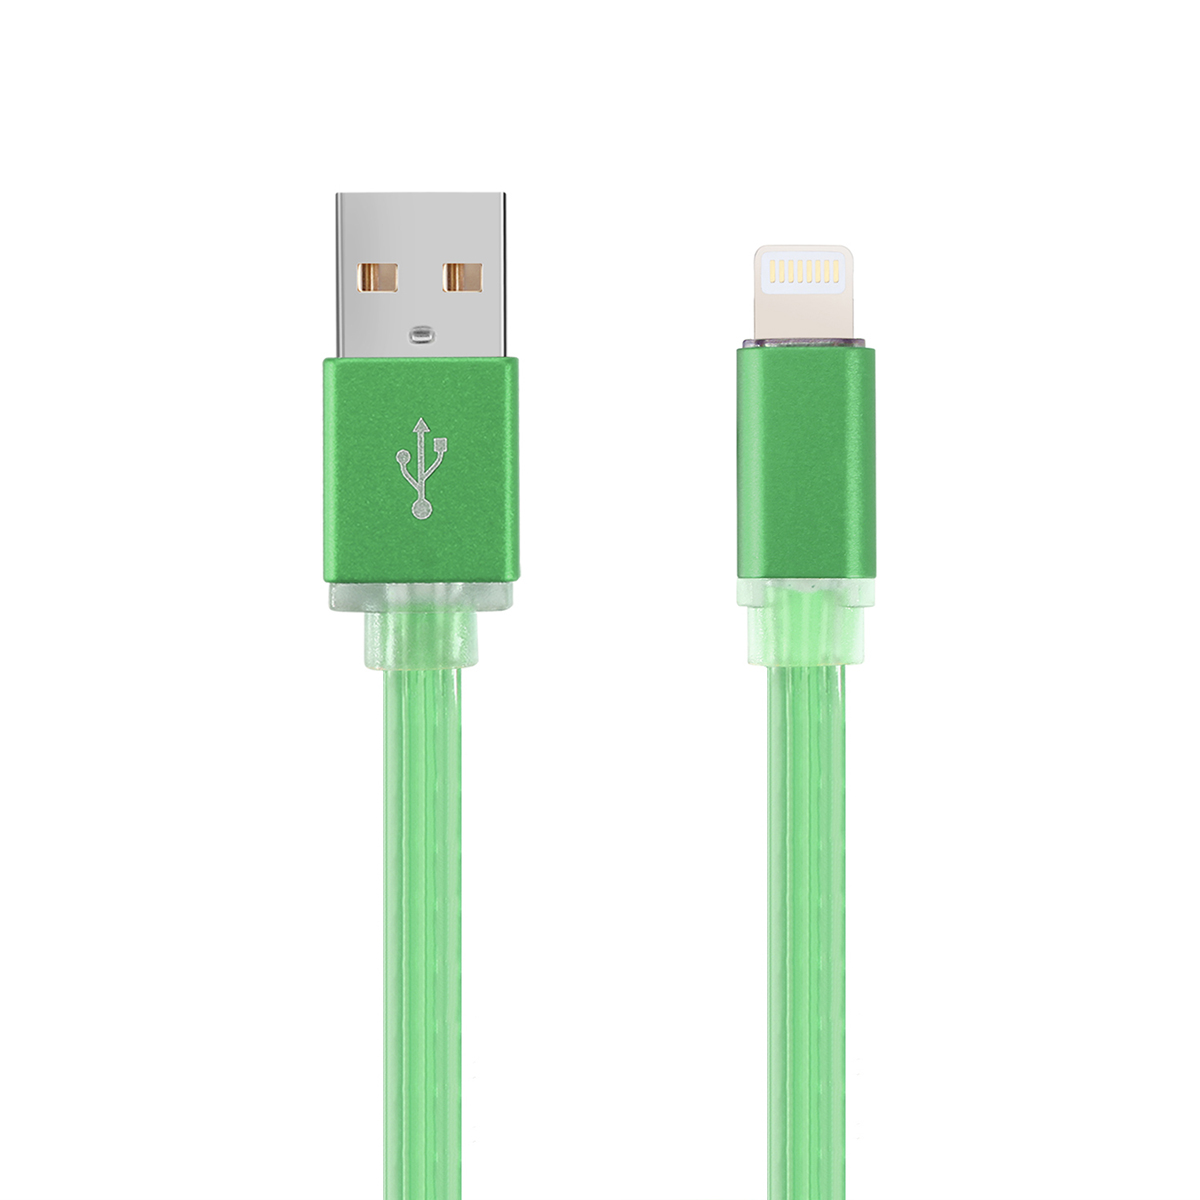 LED 8 pin USB Data Sync Stretche Charging Cable for iPhone 7 - Green